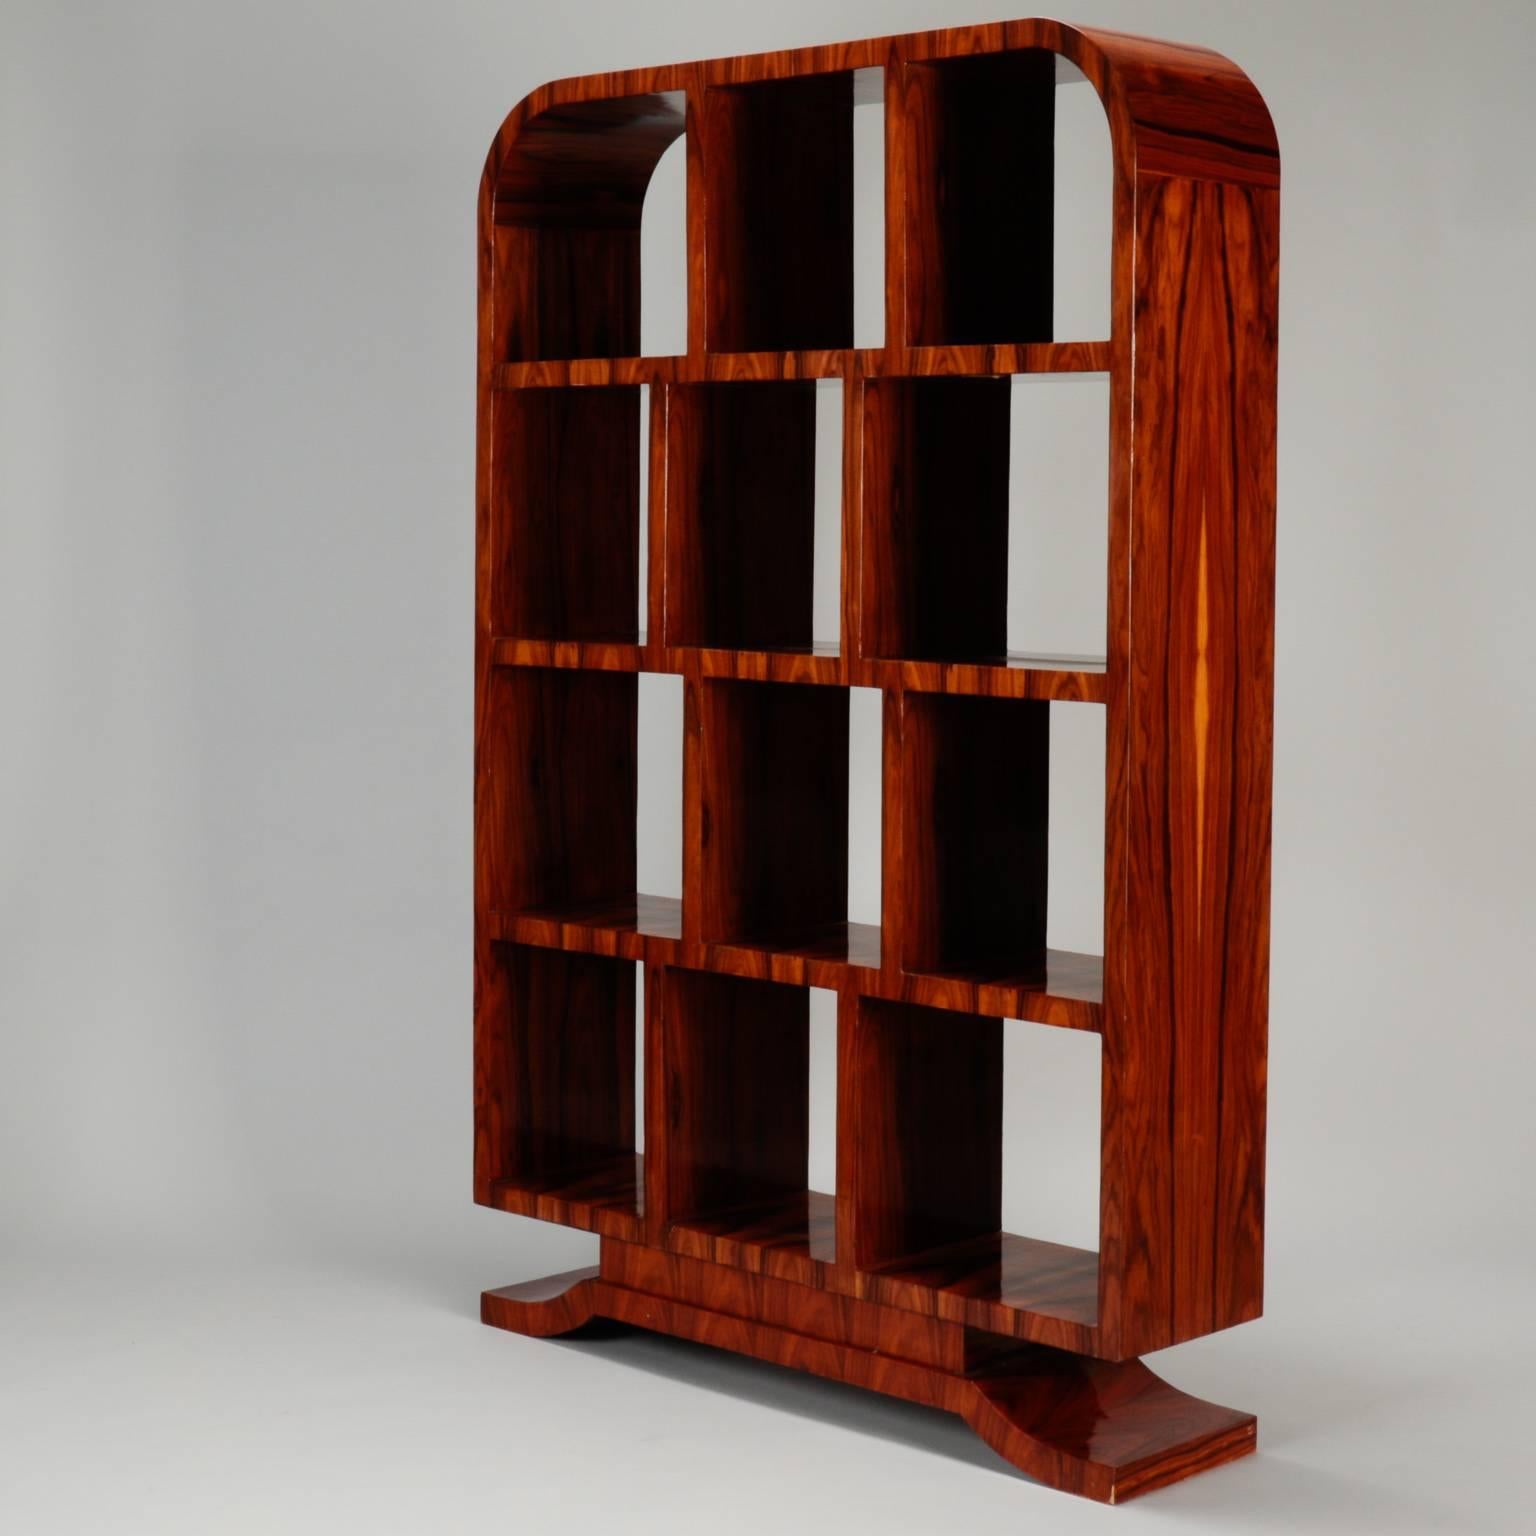 Art Deco era étagère of polished burl wood with footed pedestal base and four shelves with fixed dividers and an elegant, arched top, circa 1930s.
   